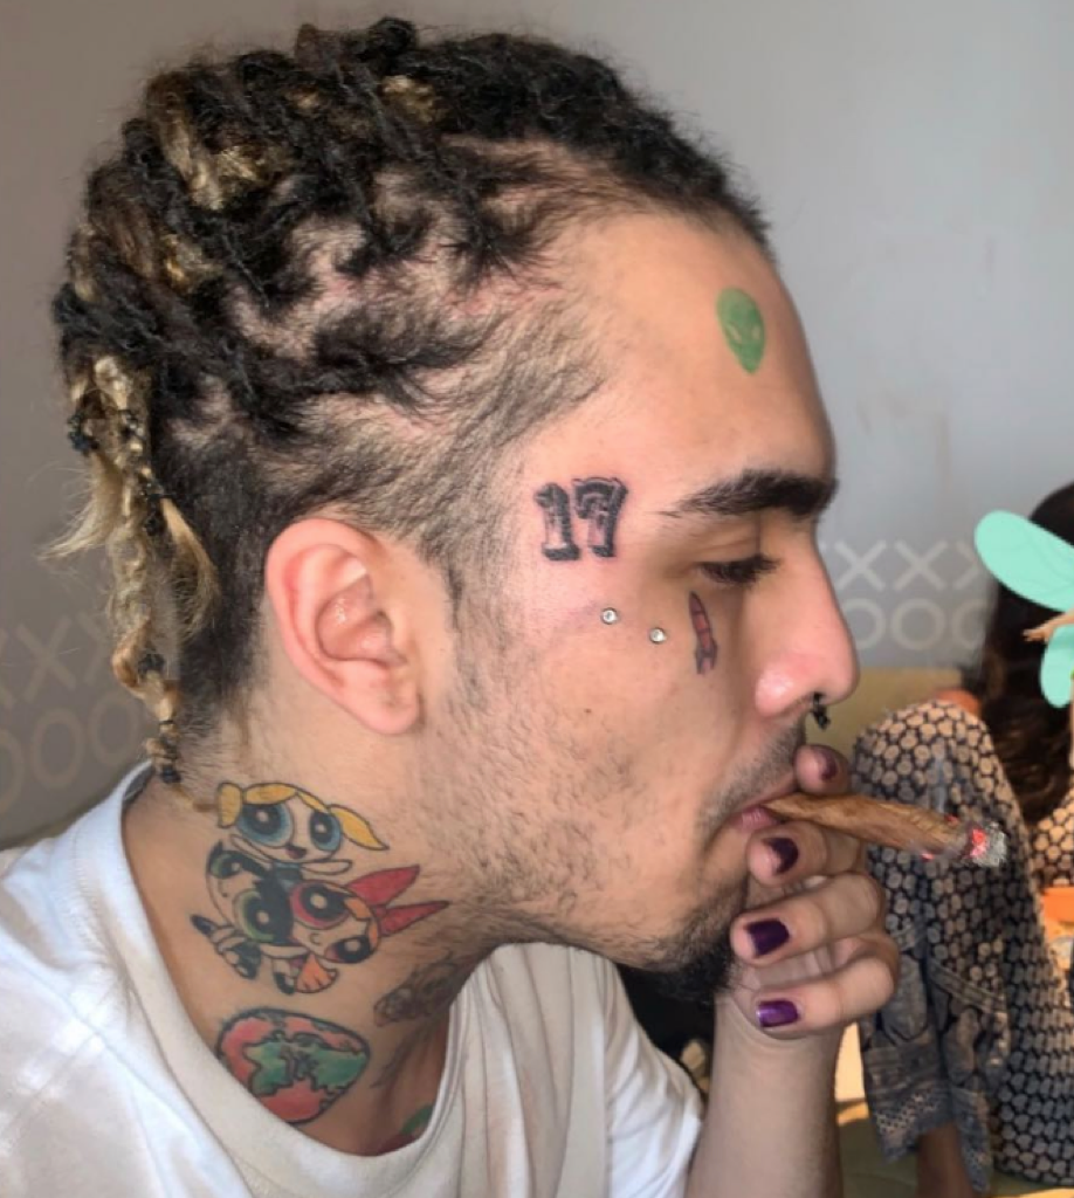 Wallpaper Lil Pump Rapper Gucci Gang Hair Face Background  Download  Free Image